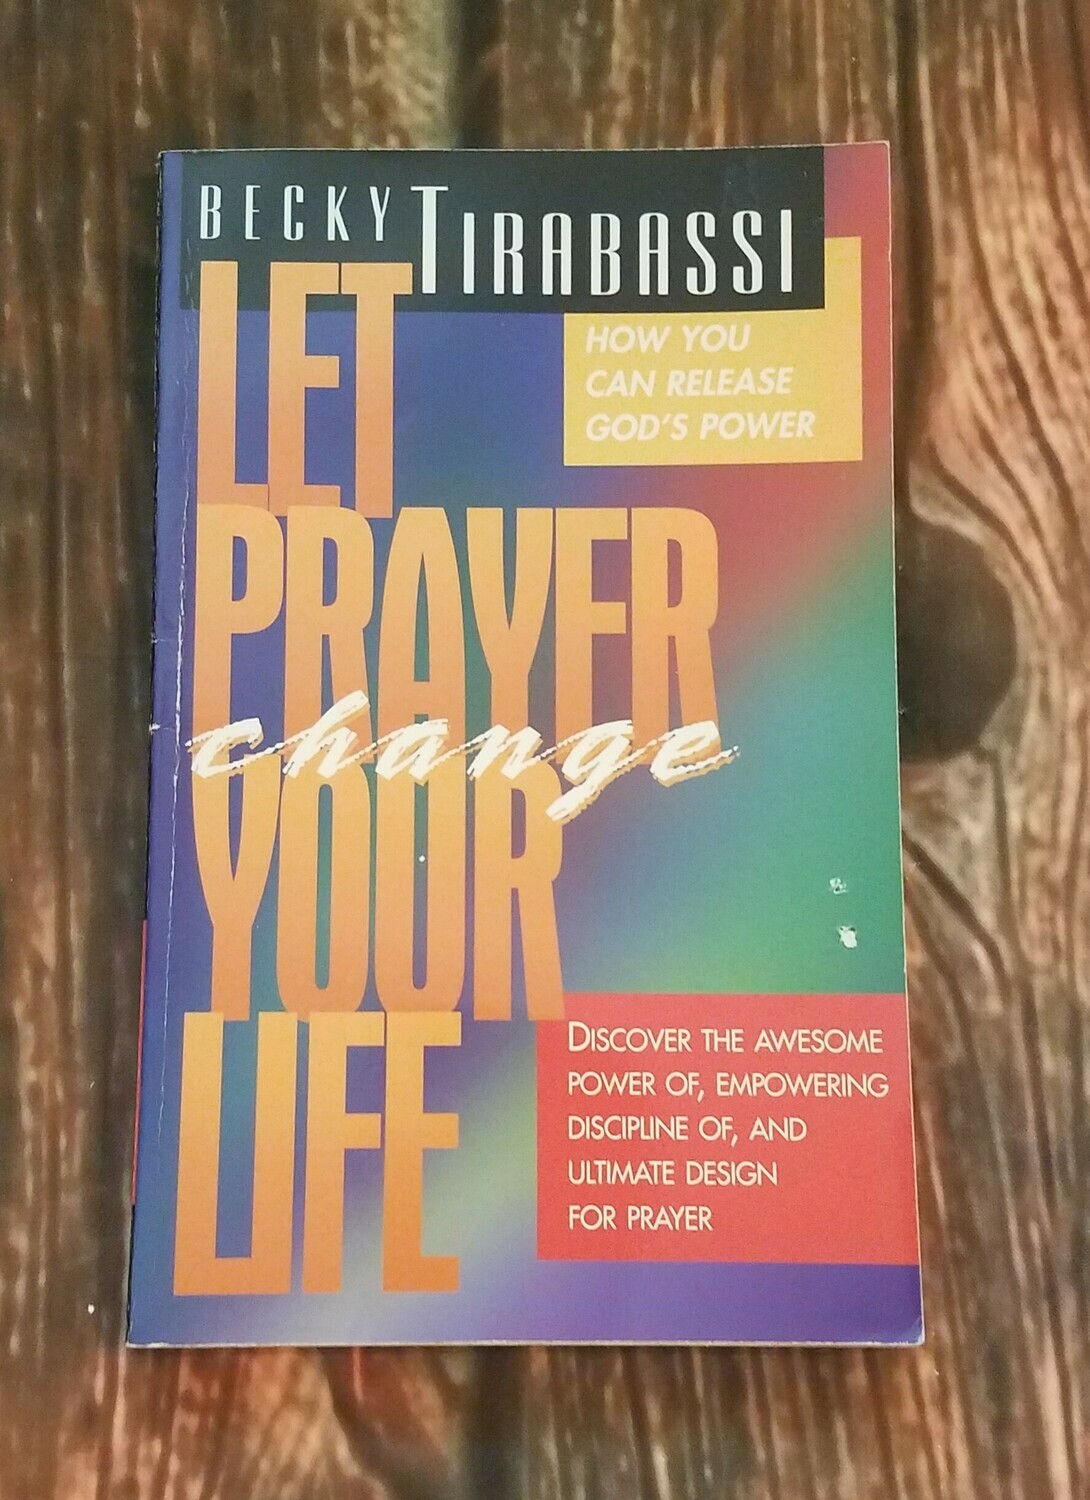 Let Prayer Change Your Life by Becky Tirabassi